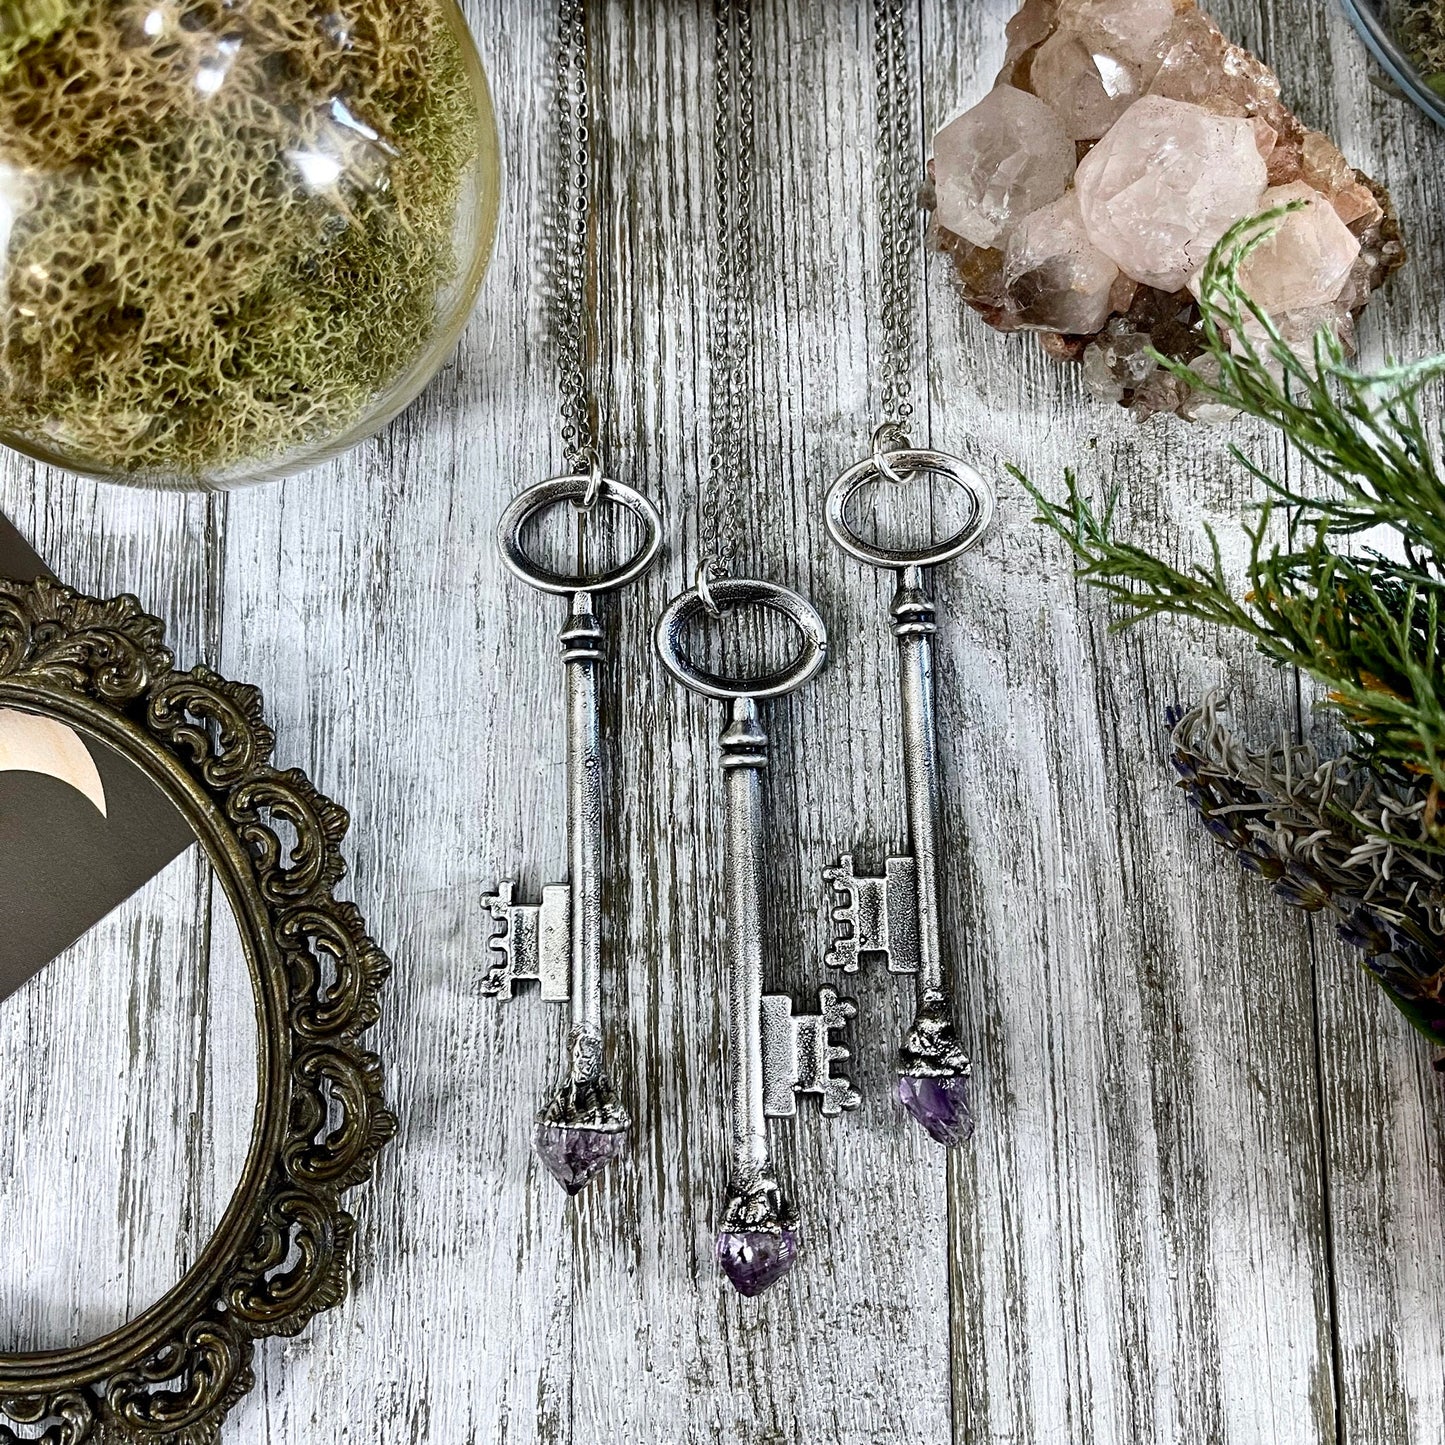 Raw Amethyst Crystal Vintage Skeleton Key Necklace Pendant in Fine Silver / Foxlark Collection - One of a Kind